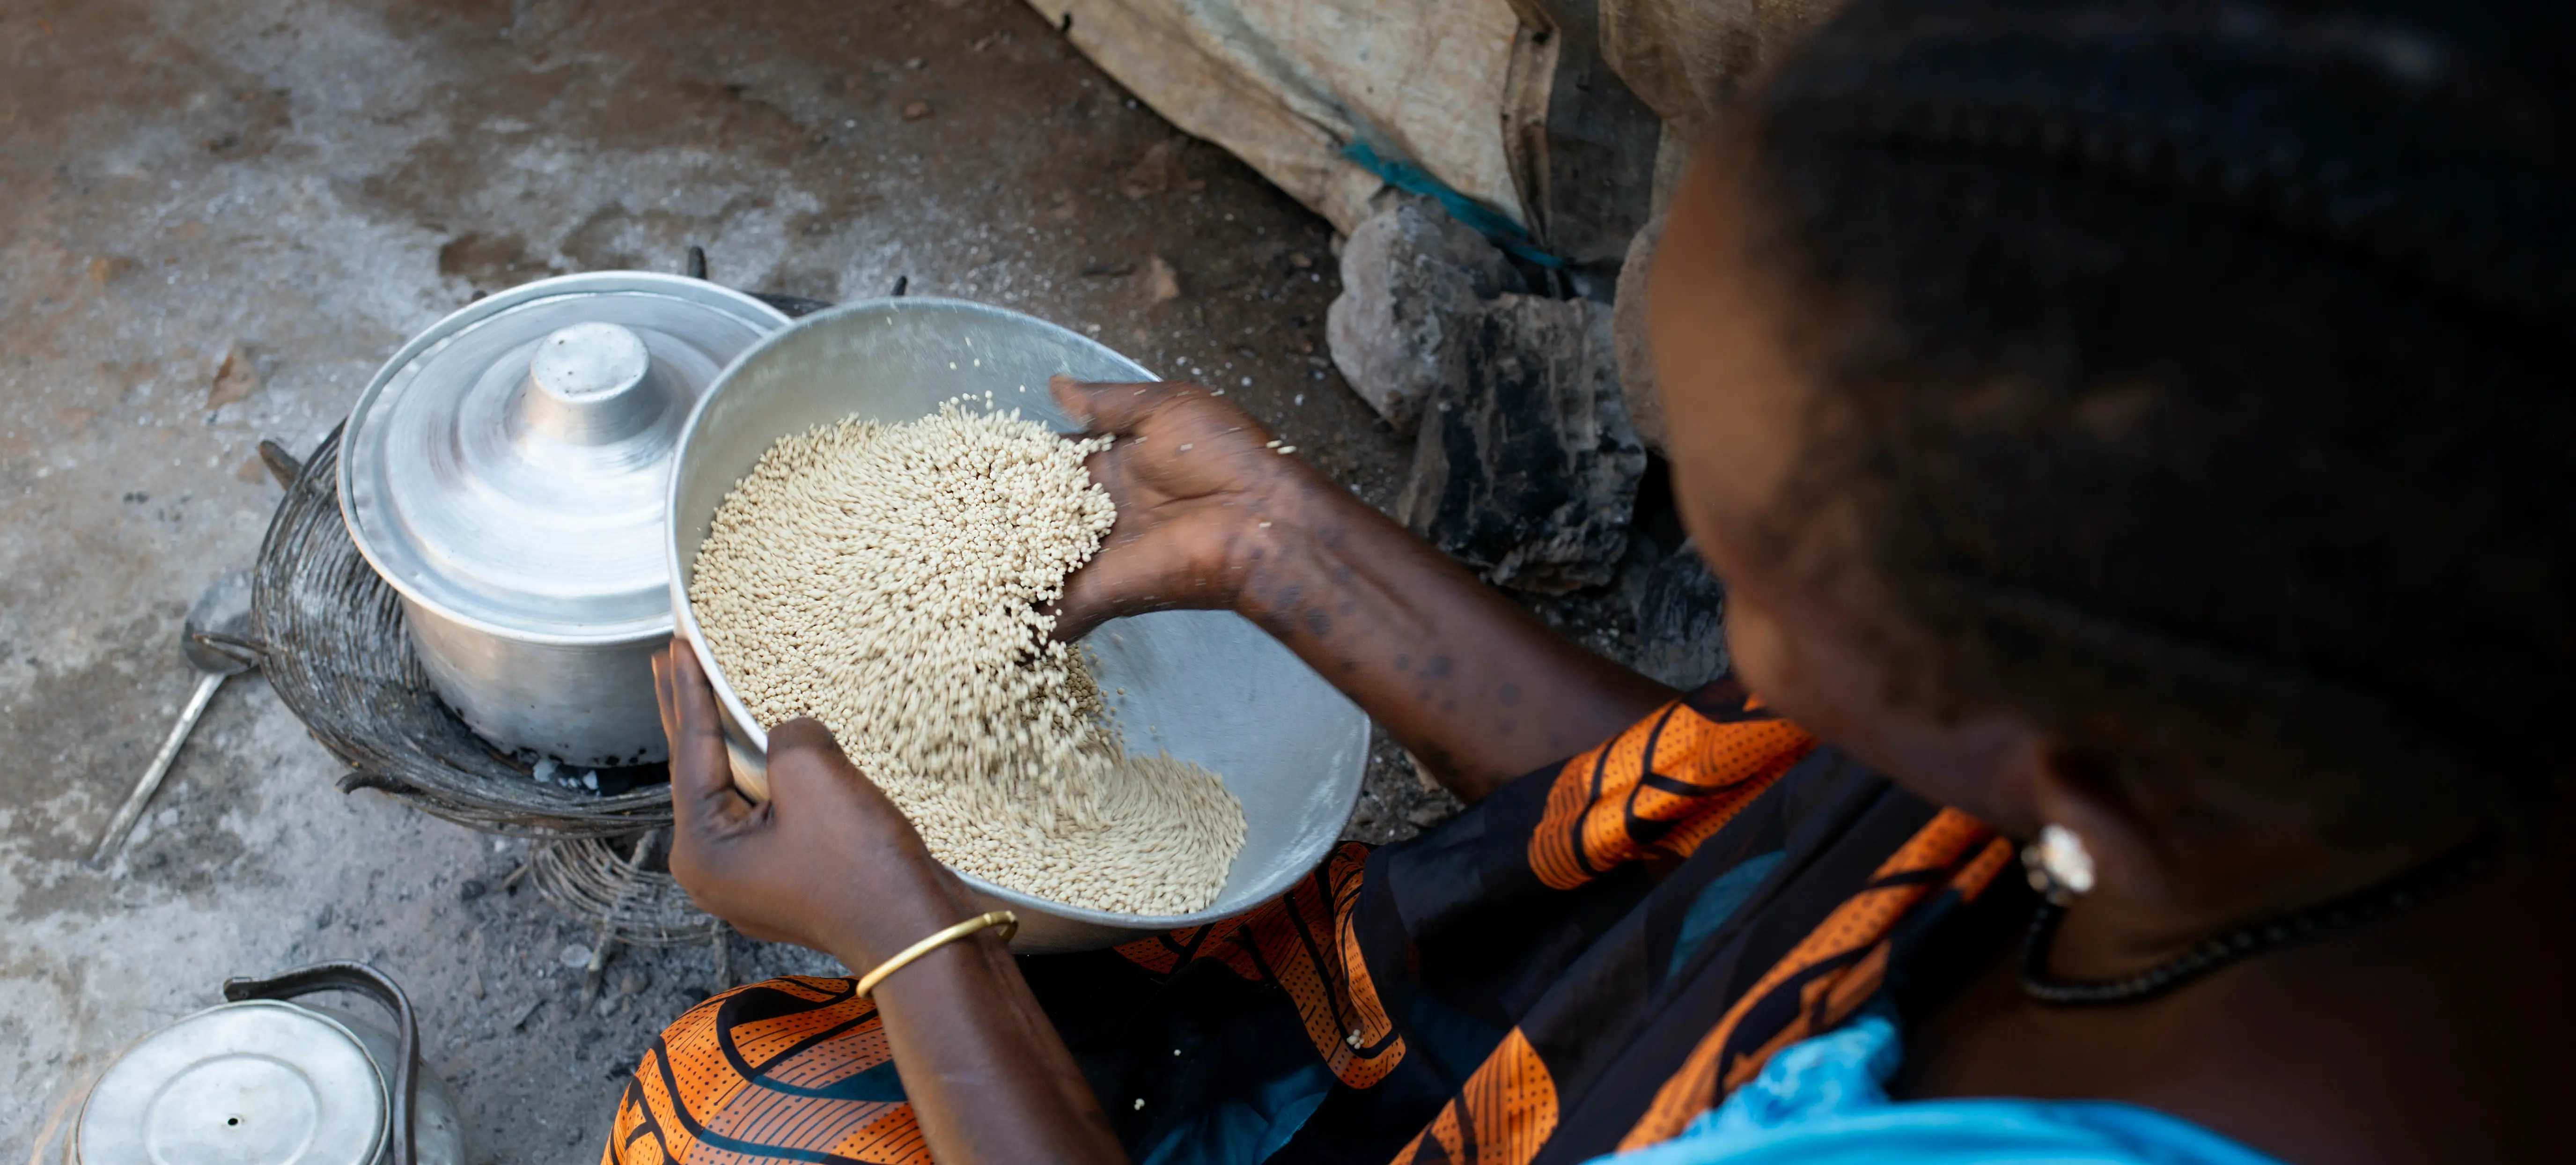 A woman in south sudan cooks walwal